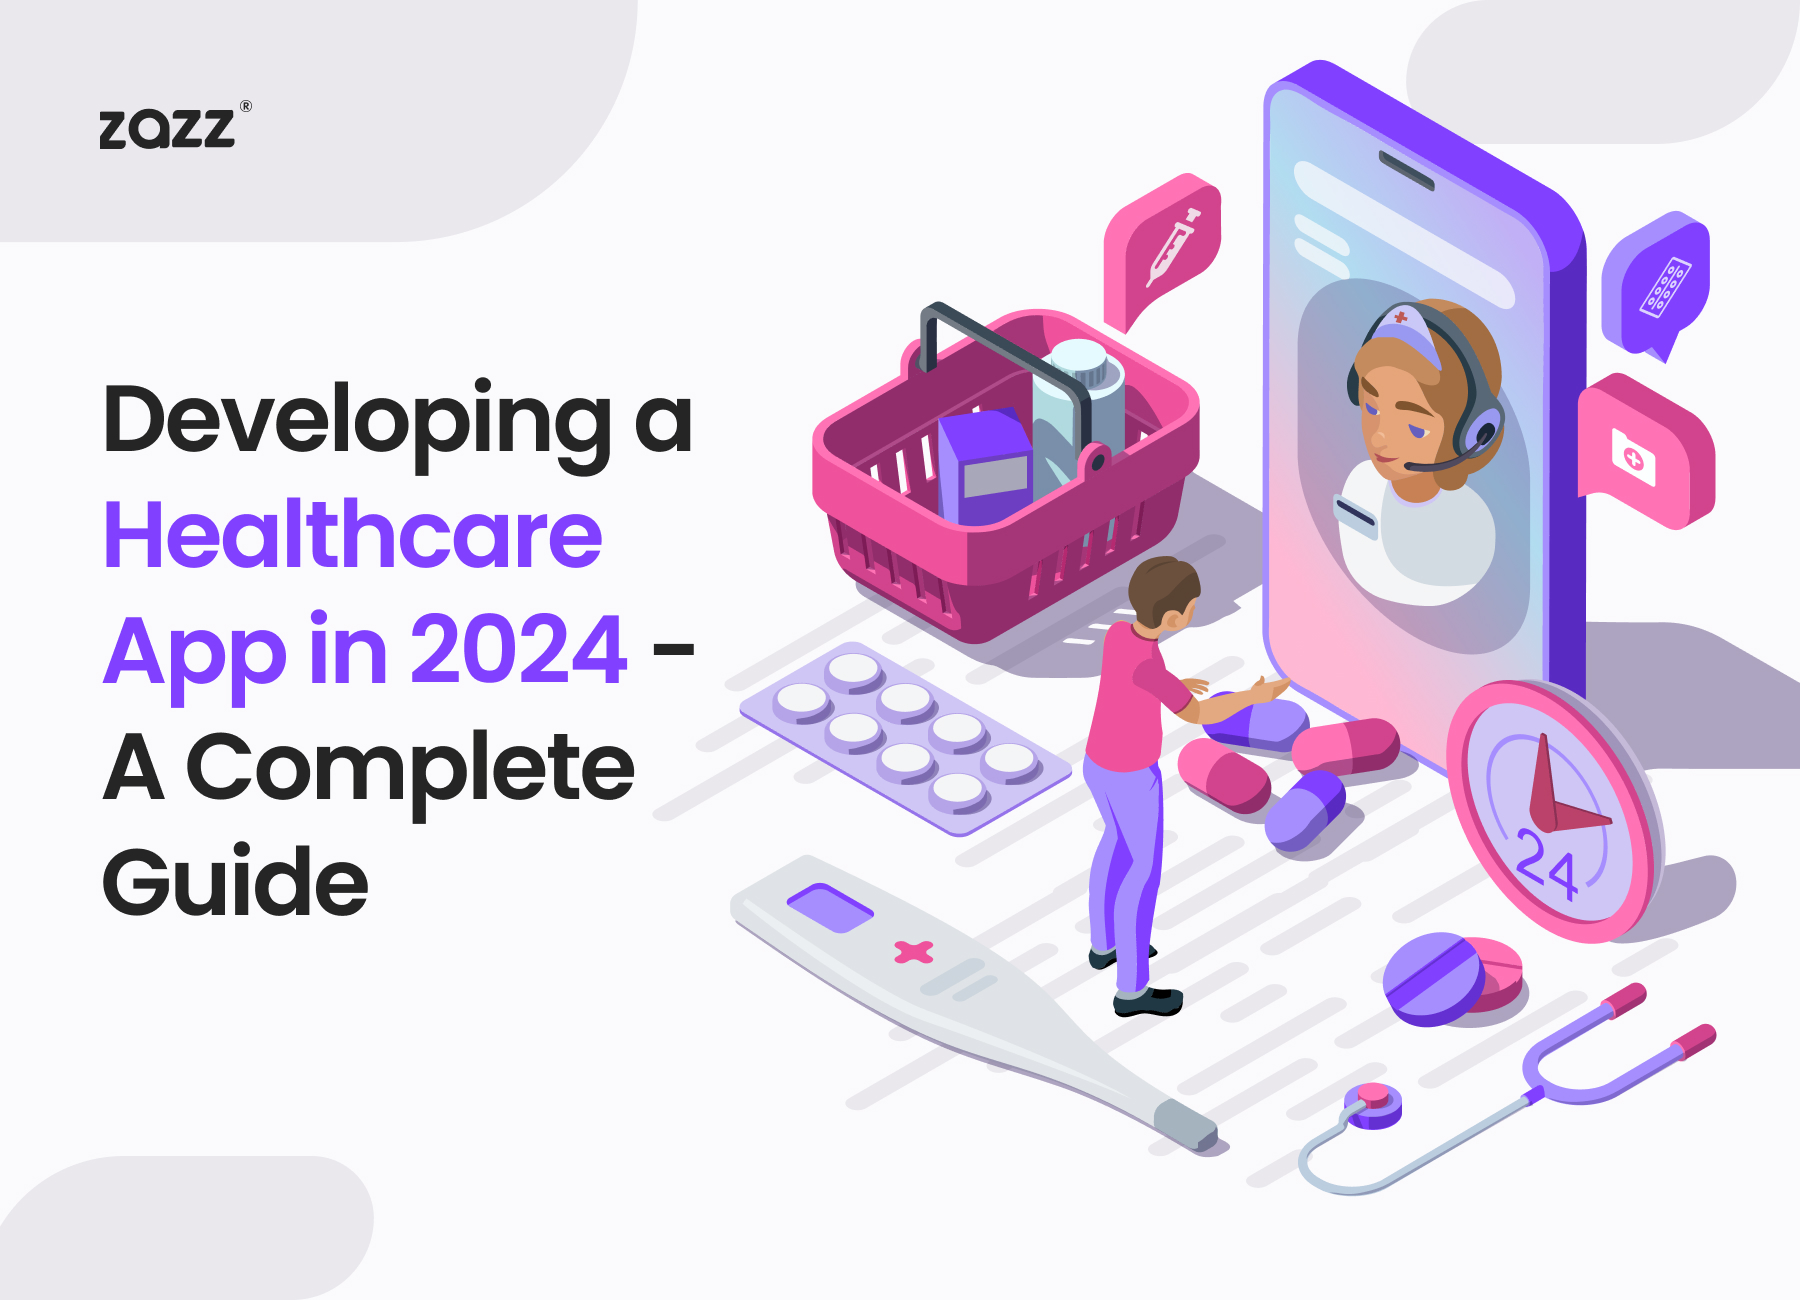 Developing a Healthcare App in 2024 - A Complete Guide